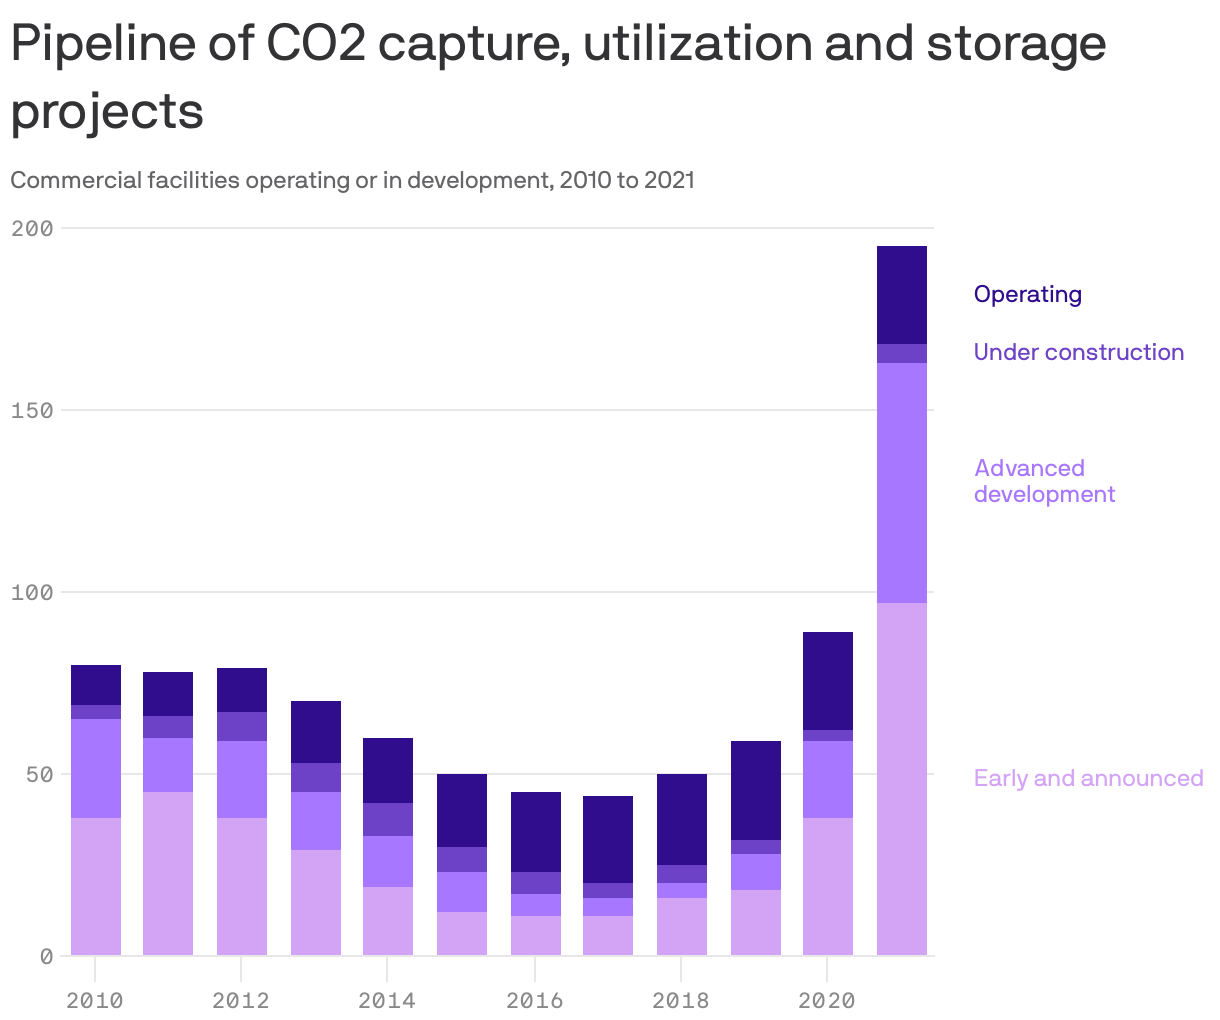 Pipeline of CO2 capture, utilization and storage projects